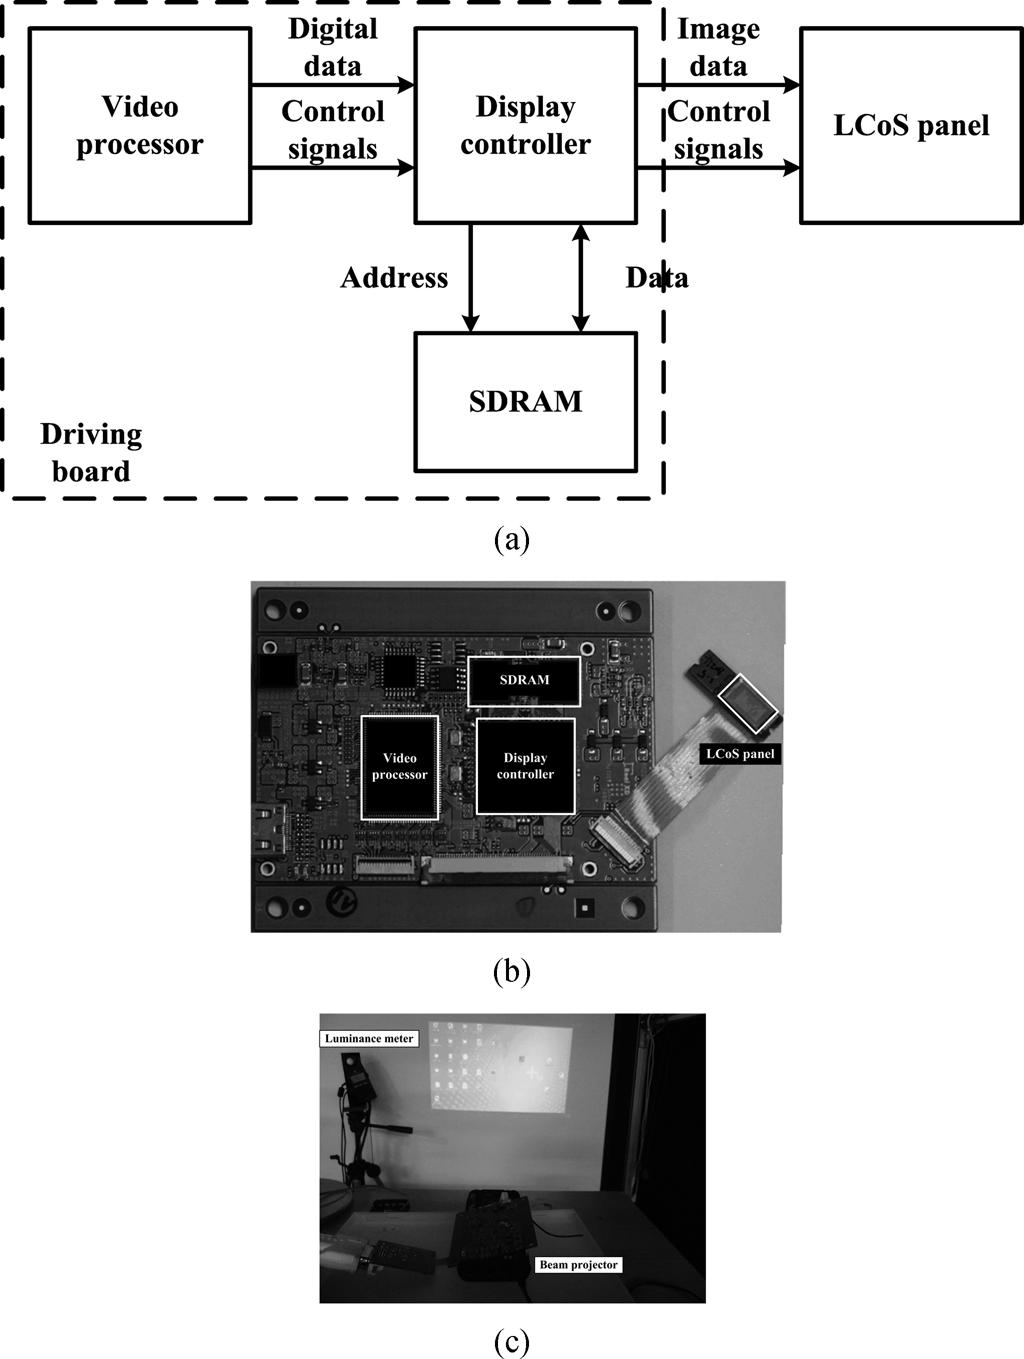 KANG AND KWON: DIGITAL DRIVING METHOD FOR LCoS PANELS 727 Fig. 10. Measured response time of LC. Fig. 9. (a) Block diagram of the panel and driving board.